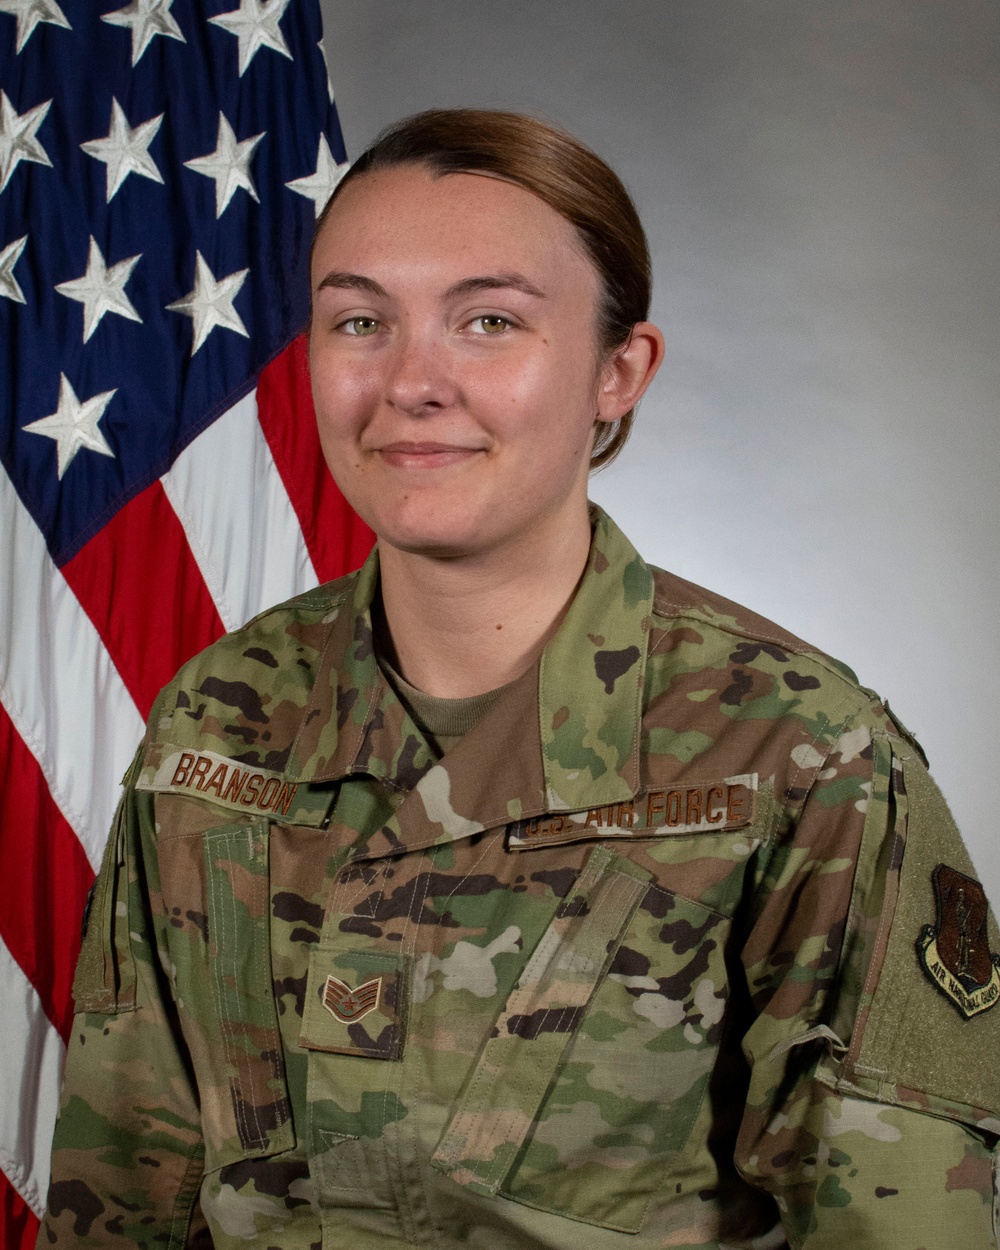 DVIDS - Images - Staff Sgt. Cheyanne Branson [Image 1 of 2]